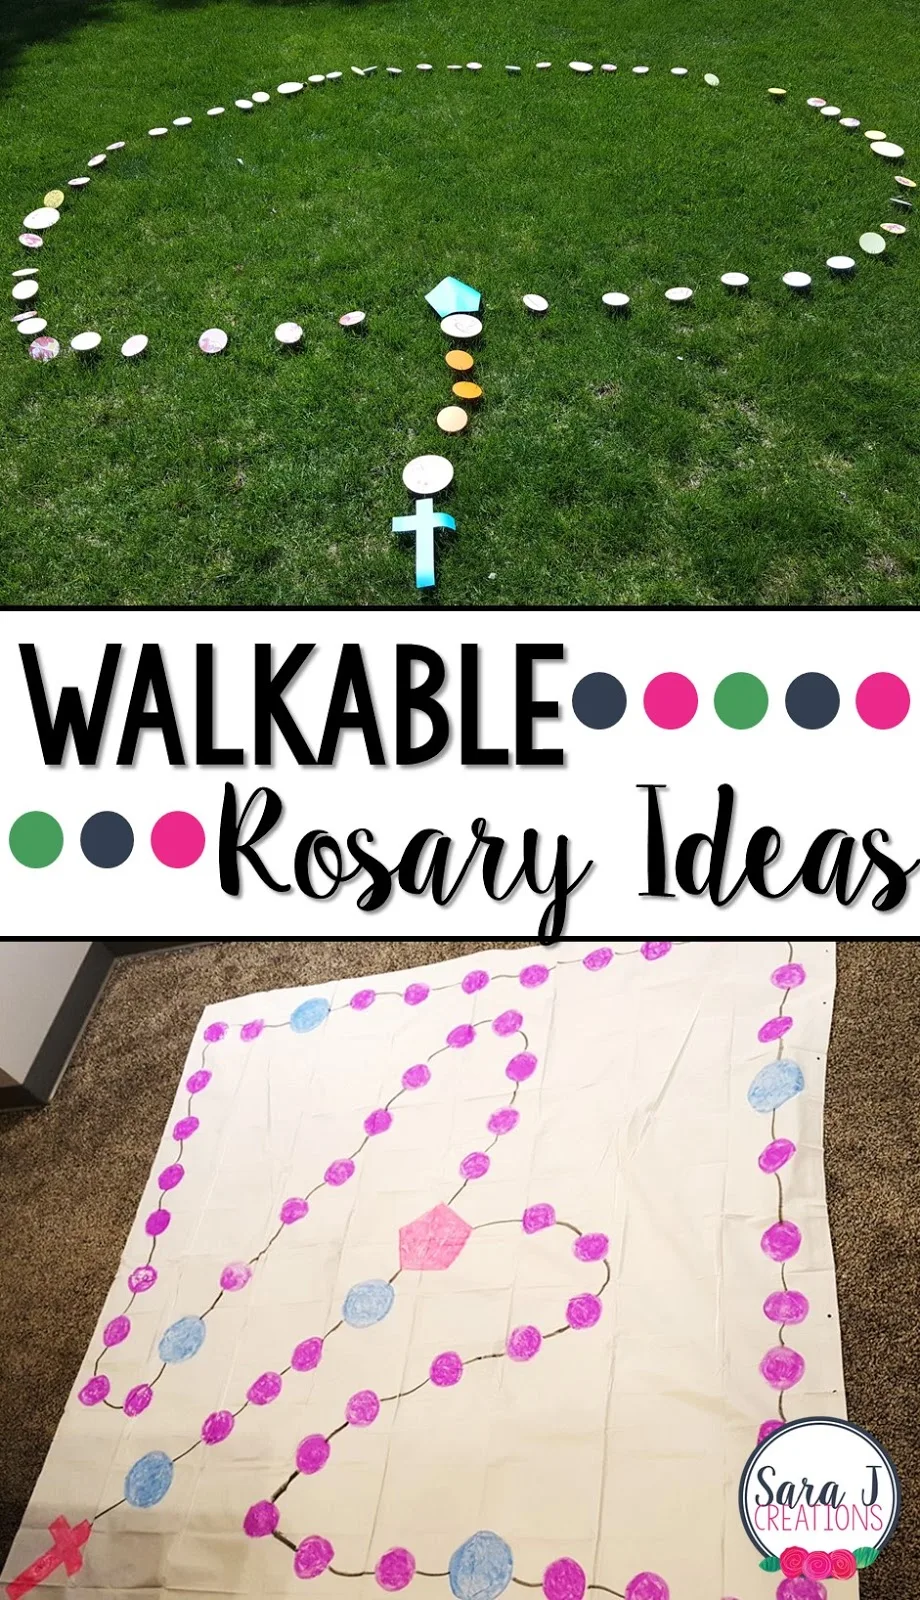 Help children learn to pray the Rosary in a fun and engaging way.   Walkable rosaries are a great way to get students up and moving whether inside or outside.